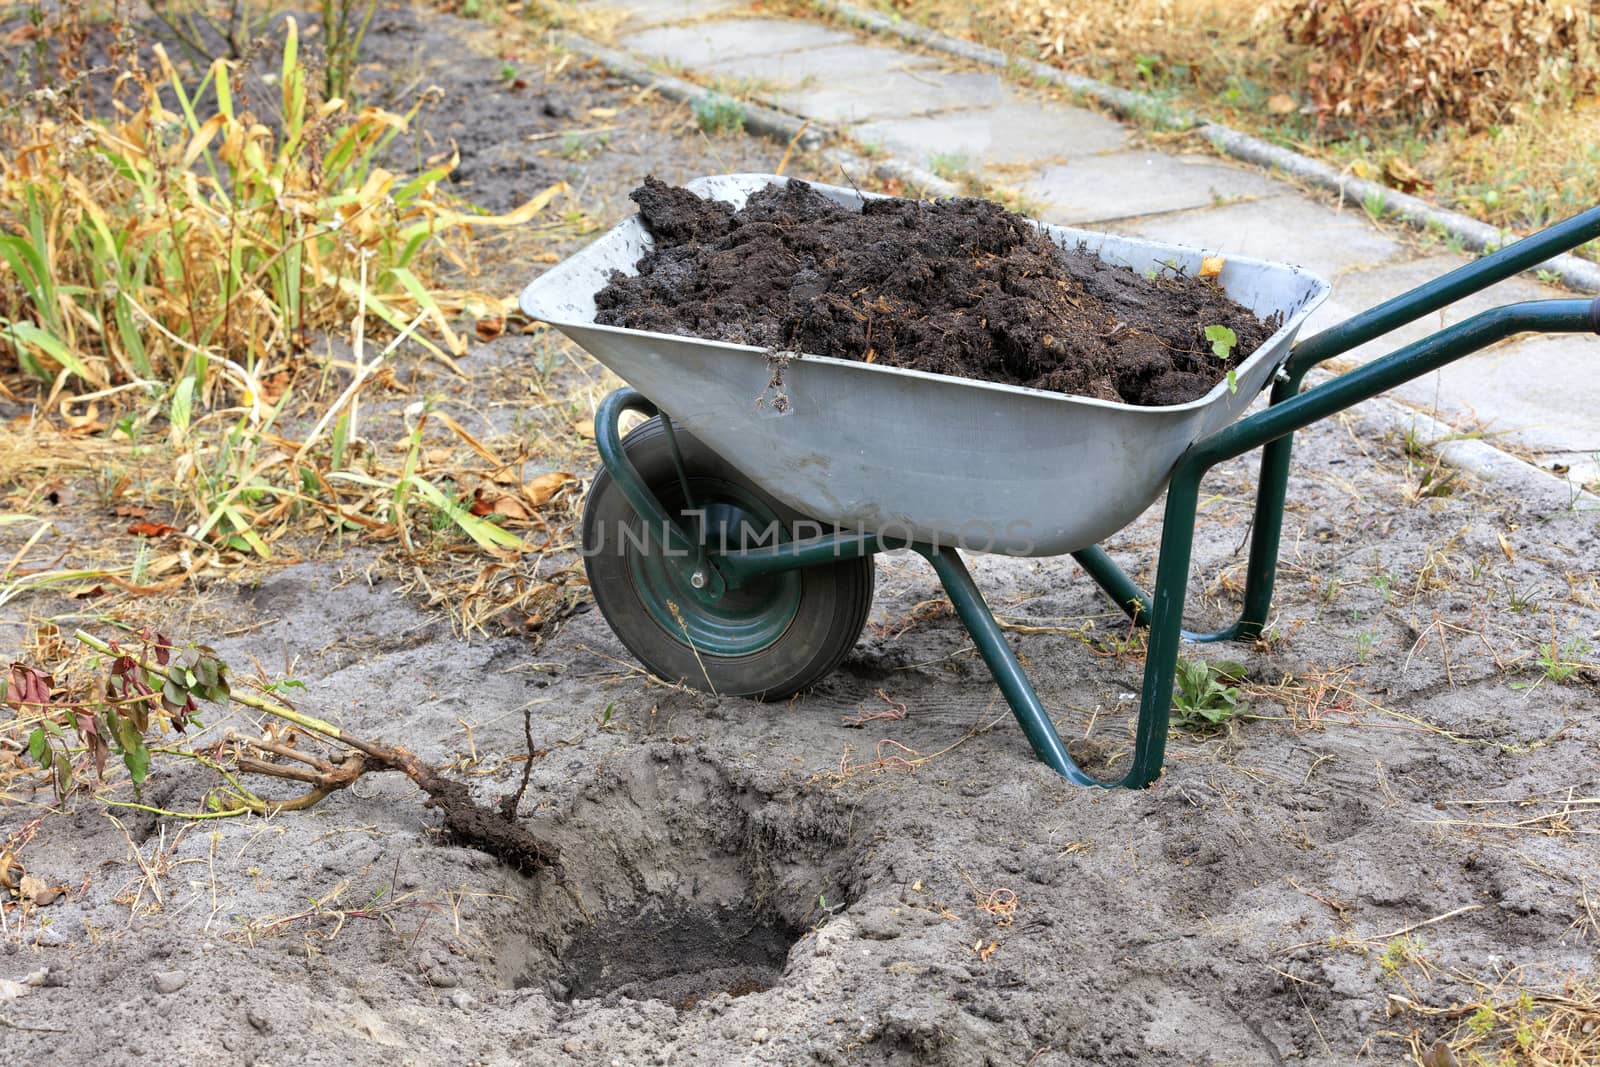 A garden wheelbarrow is used in the infield to deliver soil and peat to plant a rose bush. Home garden and agricultural concept.